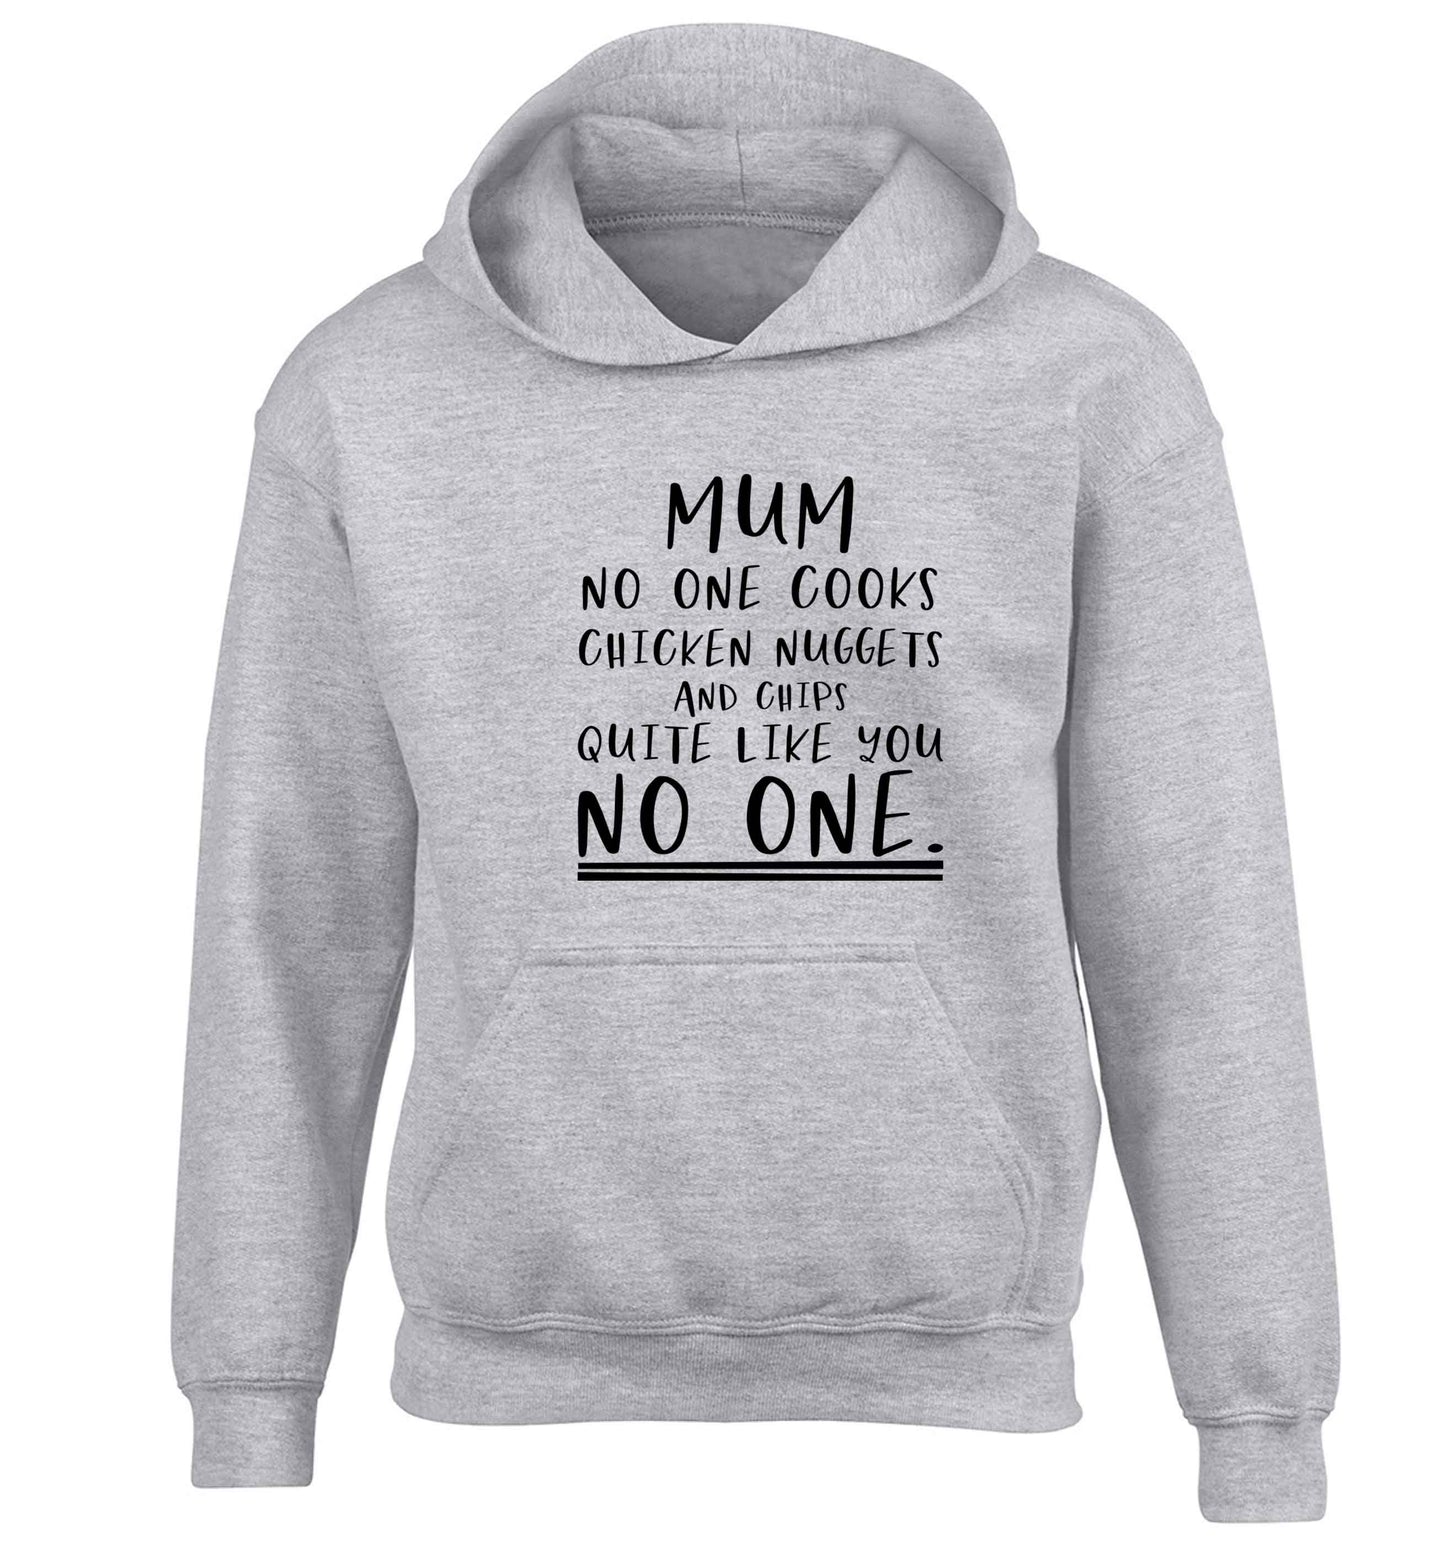 Super funny sassy gift for mother's day or birthday!  Mum no one cooks chicken nuggets and chips like you no one children's grey hoodie 12-13 Years